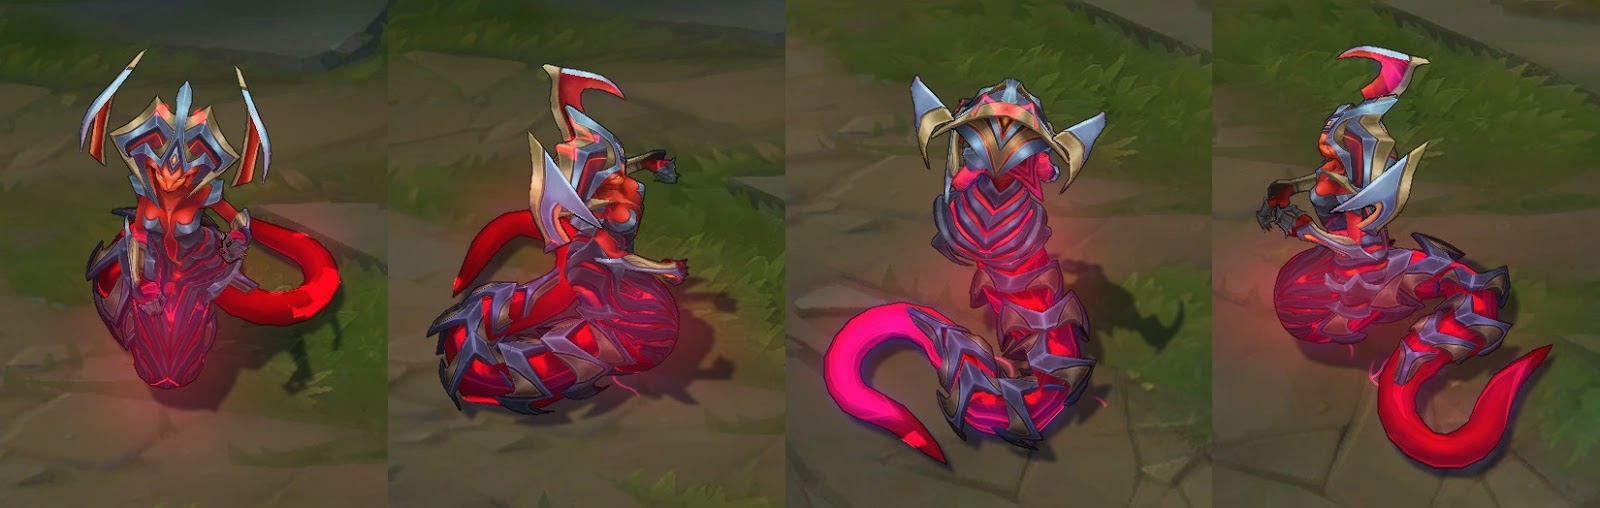 eternum cassiopeia skin for league of legends ingame picture